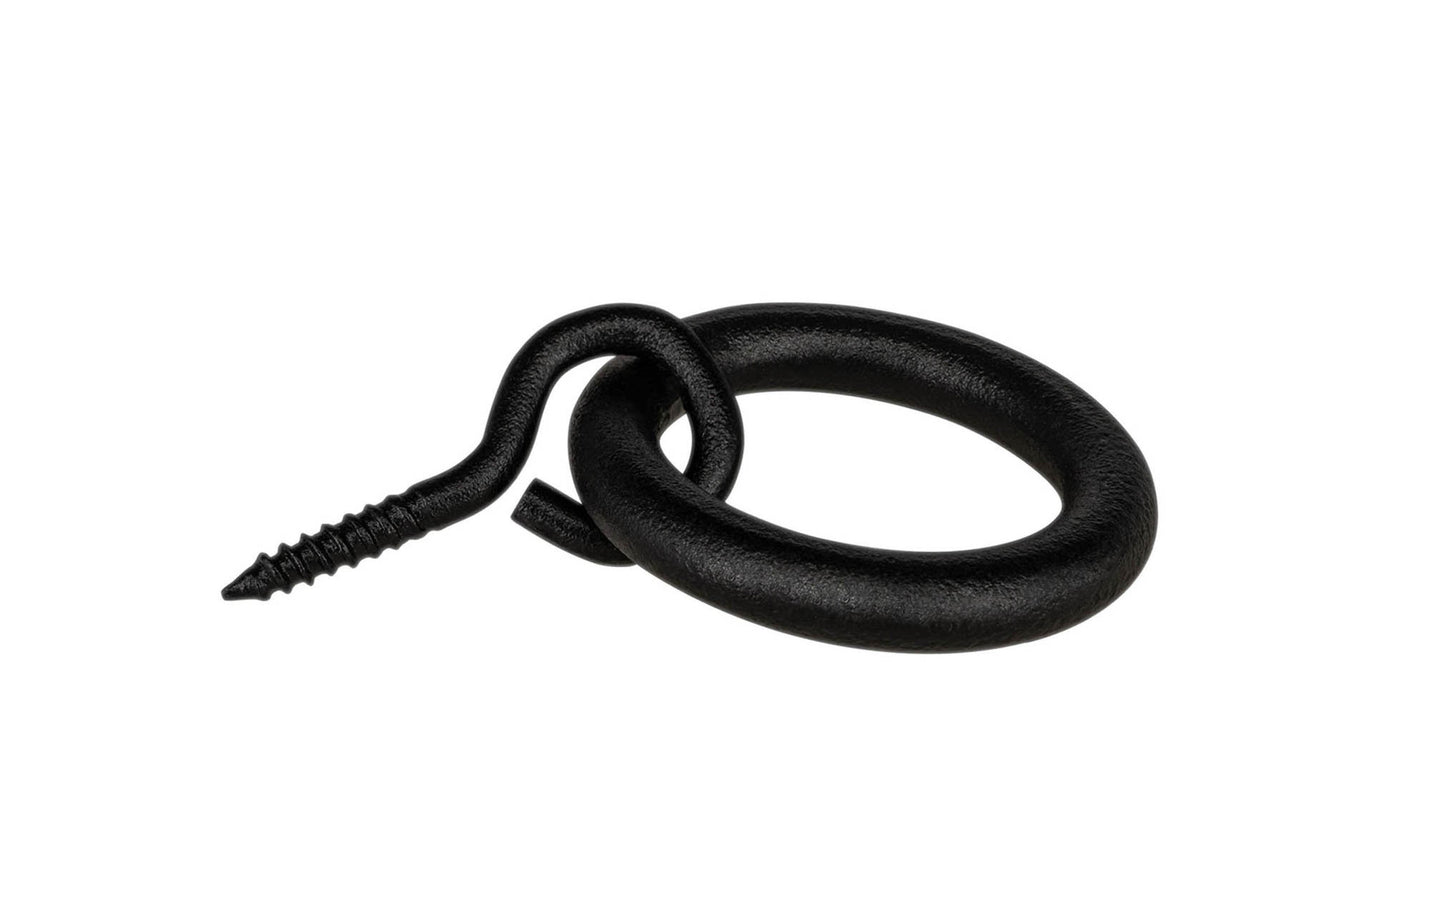 A rustic-looking cast iron pull ring with screw eye. Made of cast iron material, it has a nice durable & strong feel. 1-1/2" diameter of ring. Vintage cast iron finish. - Model 088449